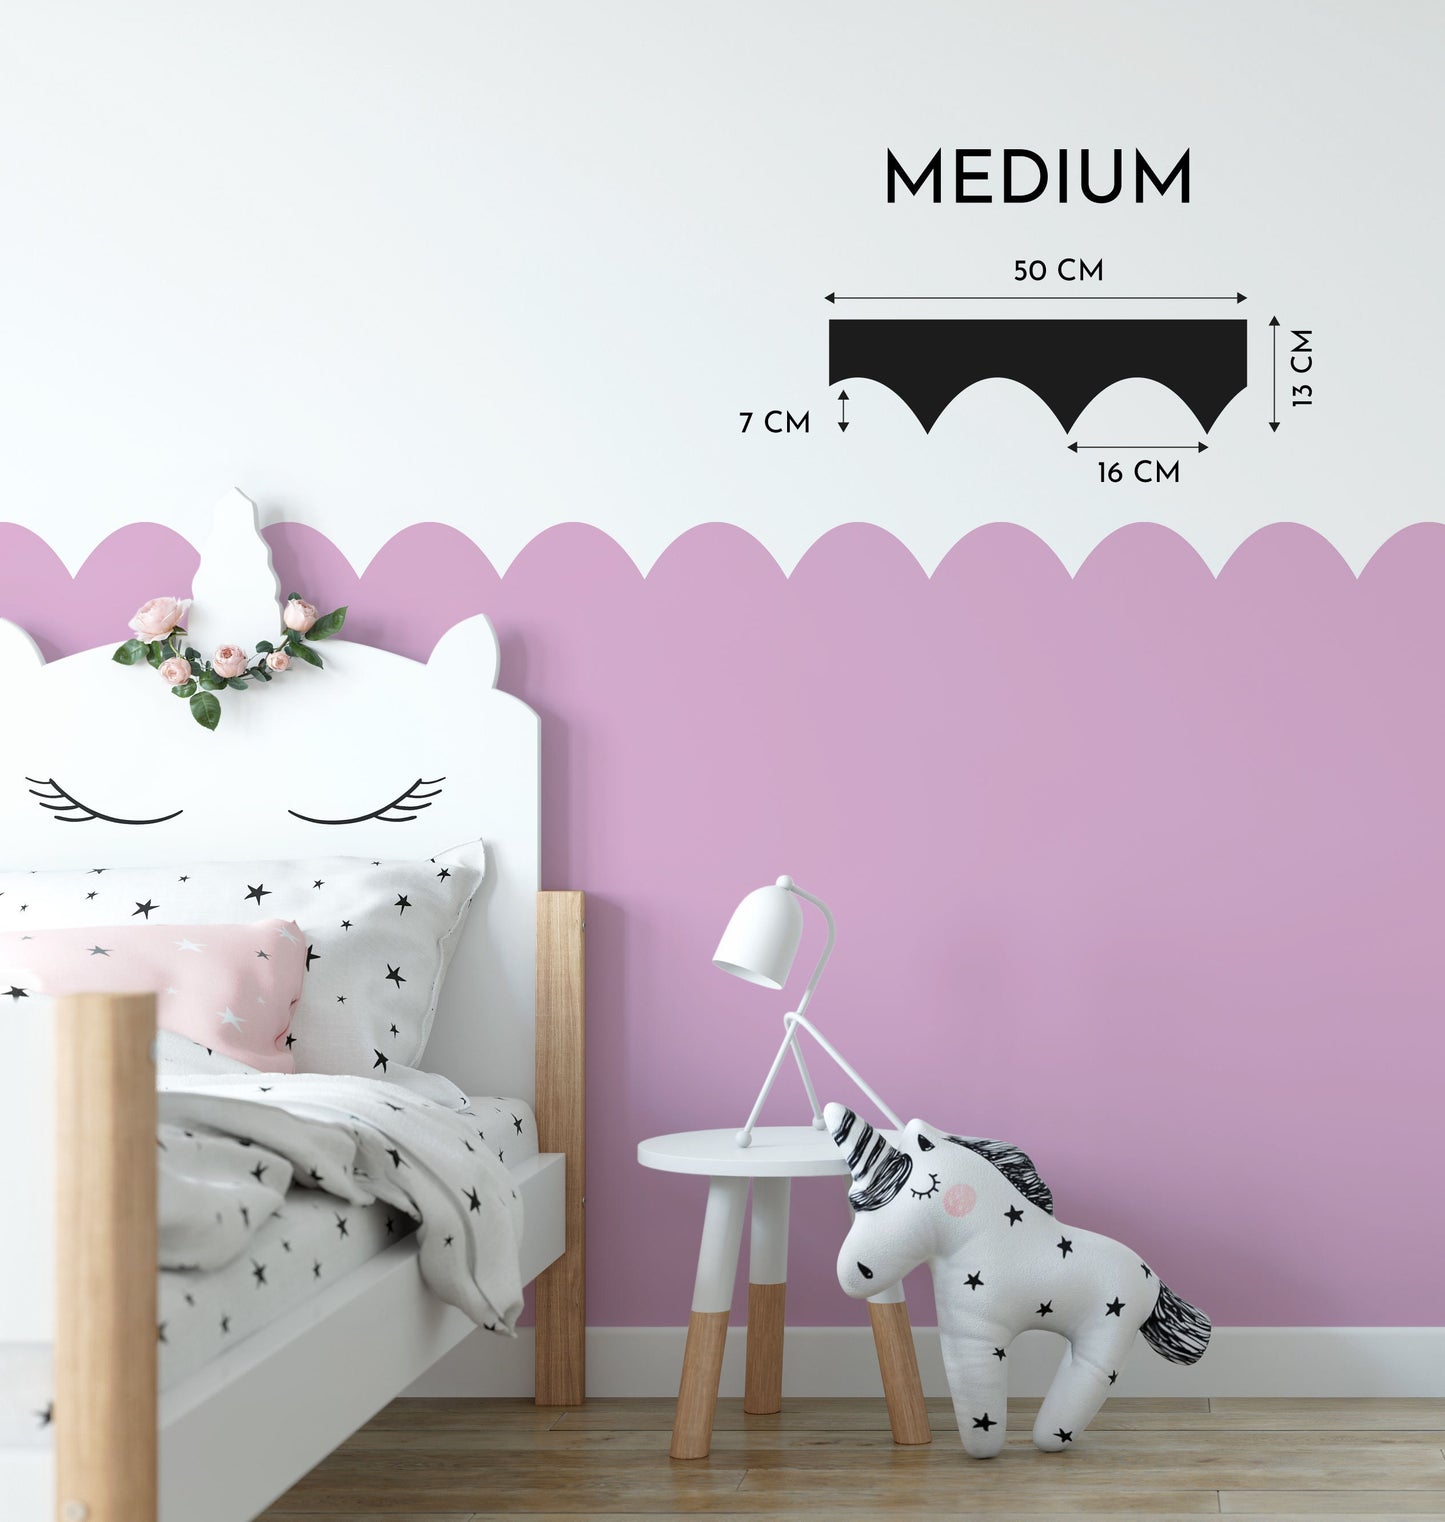 Arch Scallops Wall Stencils For Painting | Stencils For Walls | Nursery Room Paint Stencil Decor Boys Girls Kids Bedroom